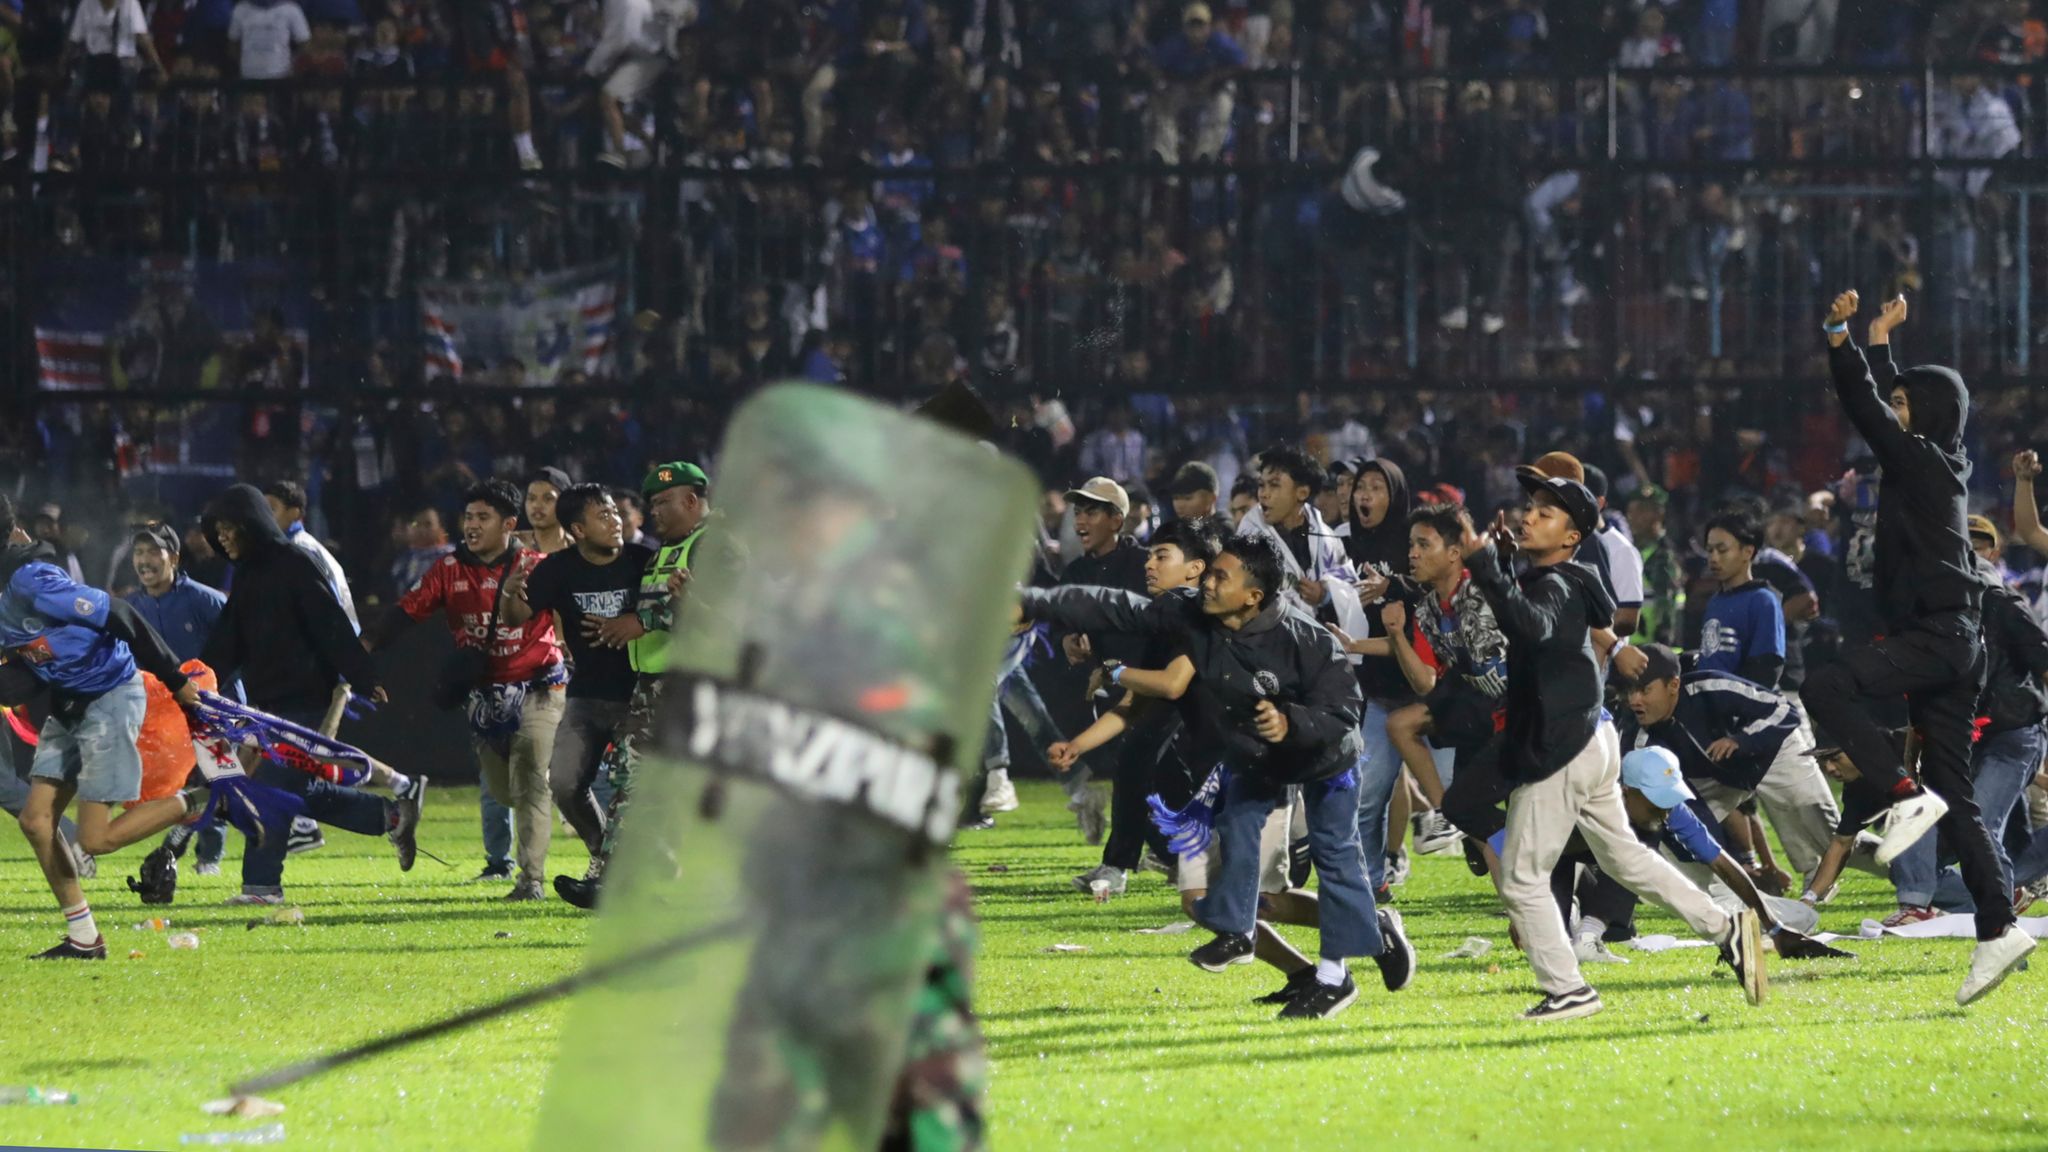 Indonesian football fans' passion can have devastating results, says